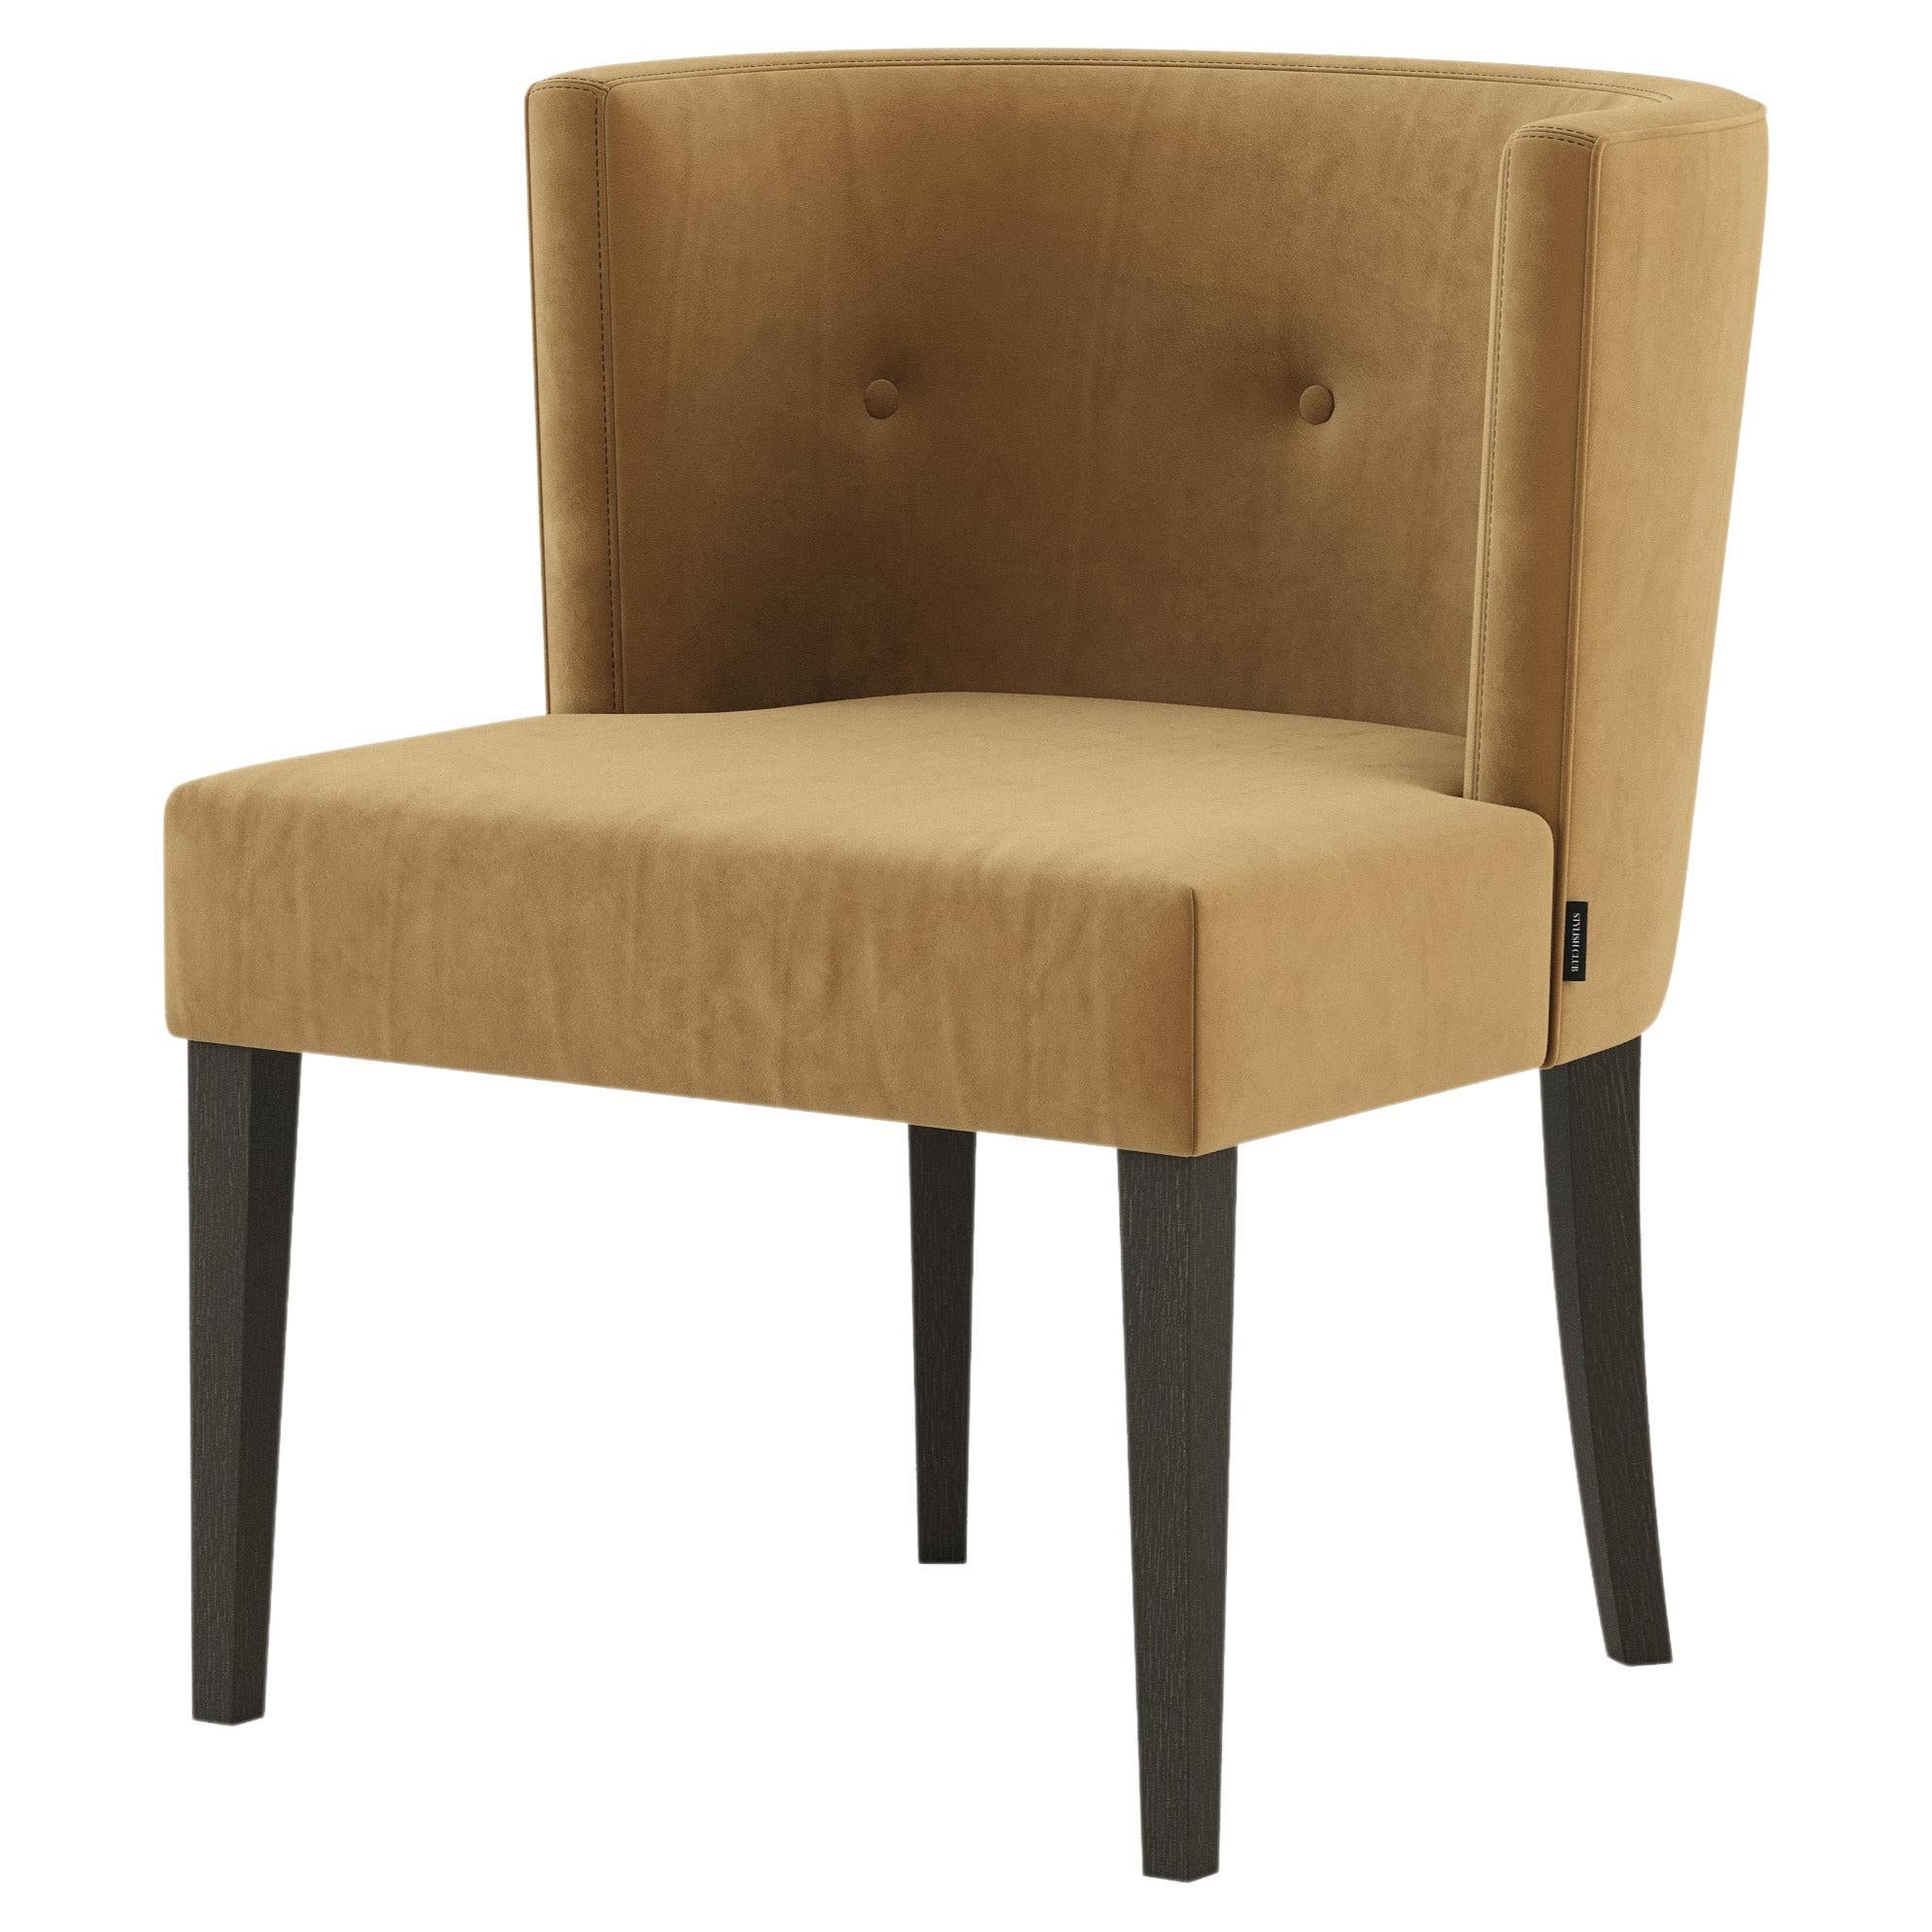 Modern Milos Chair Made with Oak and Velvet, Handmade by Stylish Club